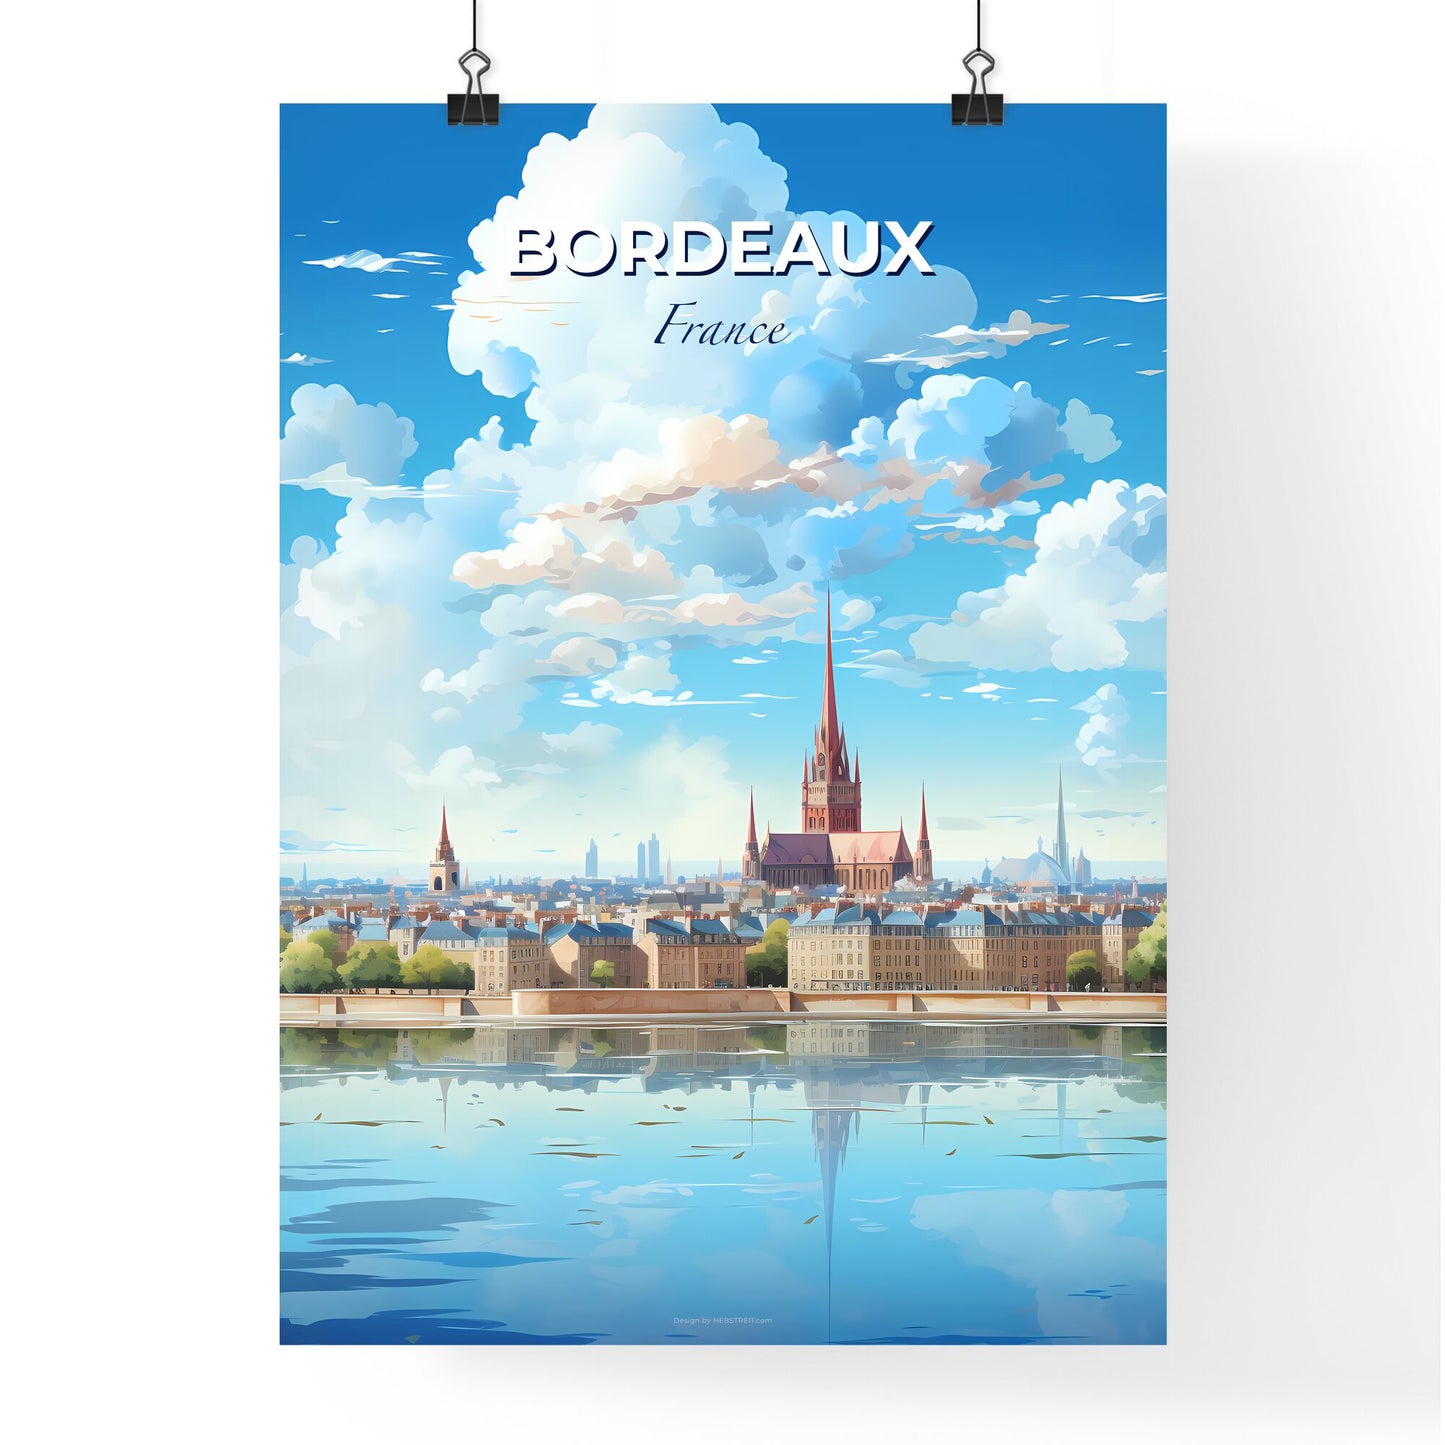 Bordeaux France Skyline - A City With A Tower And A Body Of Water - Customizable Travel Gift Default Title